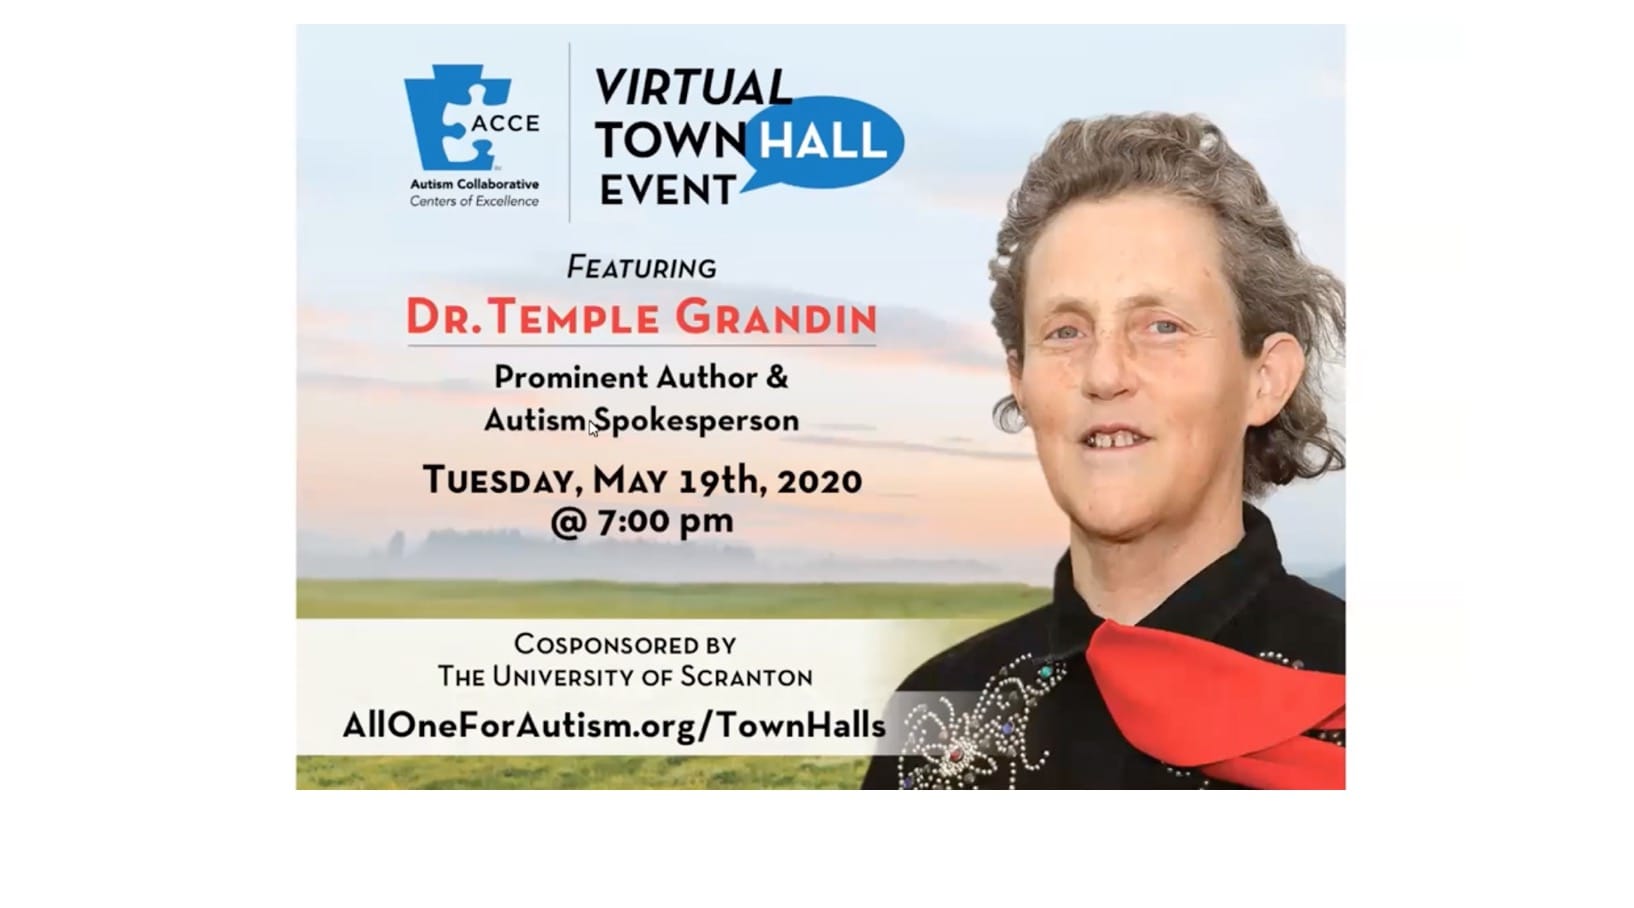 The University’s Autism Collaborative Centers of Excellence (ACCE) hosted a “sold-out” Virtual Town Hall Meeting with Temple Grandin, author of “The Autistic Brain.” Dana M. Gadaire, Psy.D., BCBA-D, visiting assistant professor in the Counseling and Human Services Department at Scranton, led the Zoom webinar interview with Dr. Grandin on May 19.